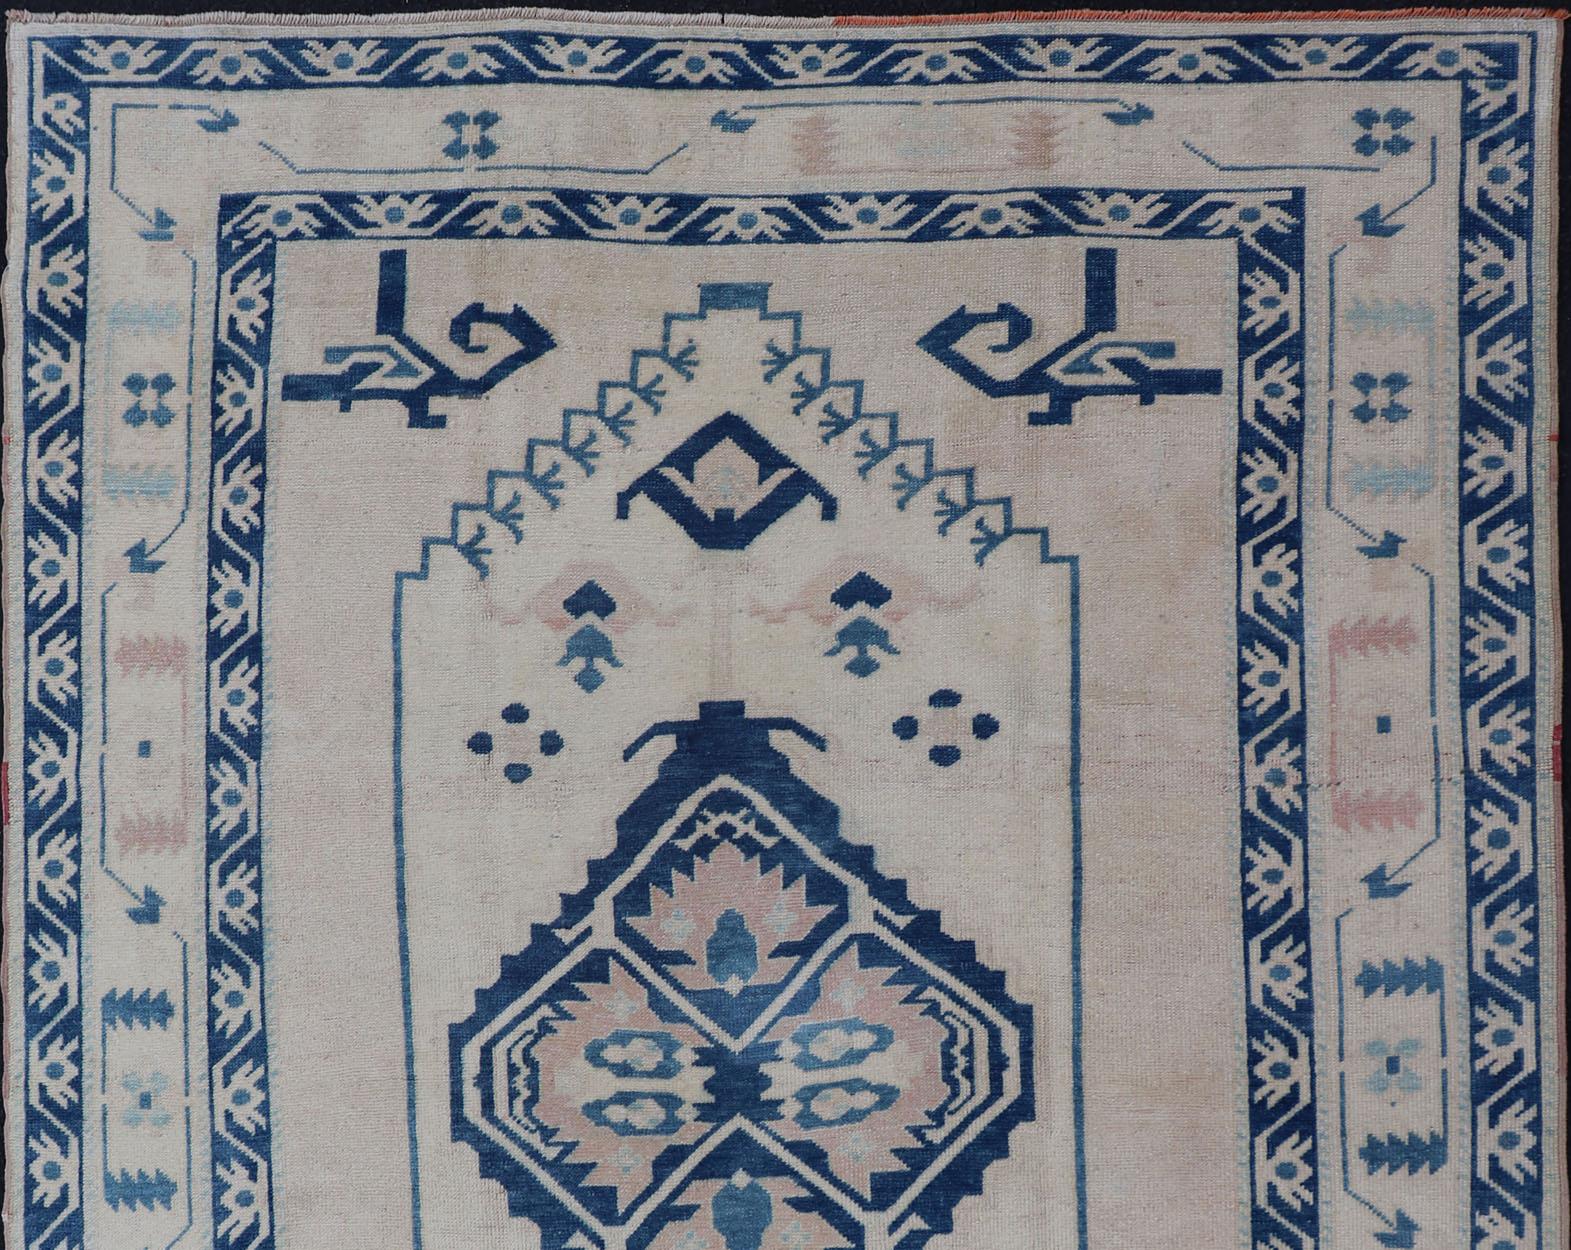 Vintage Oushak carpet with medallion design, rug EN-178035, country of origin / type: Turkey / Oushak, circa 1950

This vintage Oushak carpet from mid-20th century Turkey features a tribal medallion design rendered in tones of blue and green, set